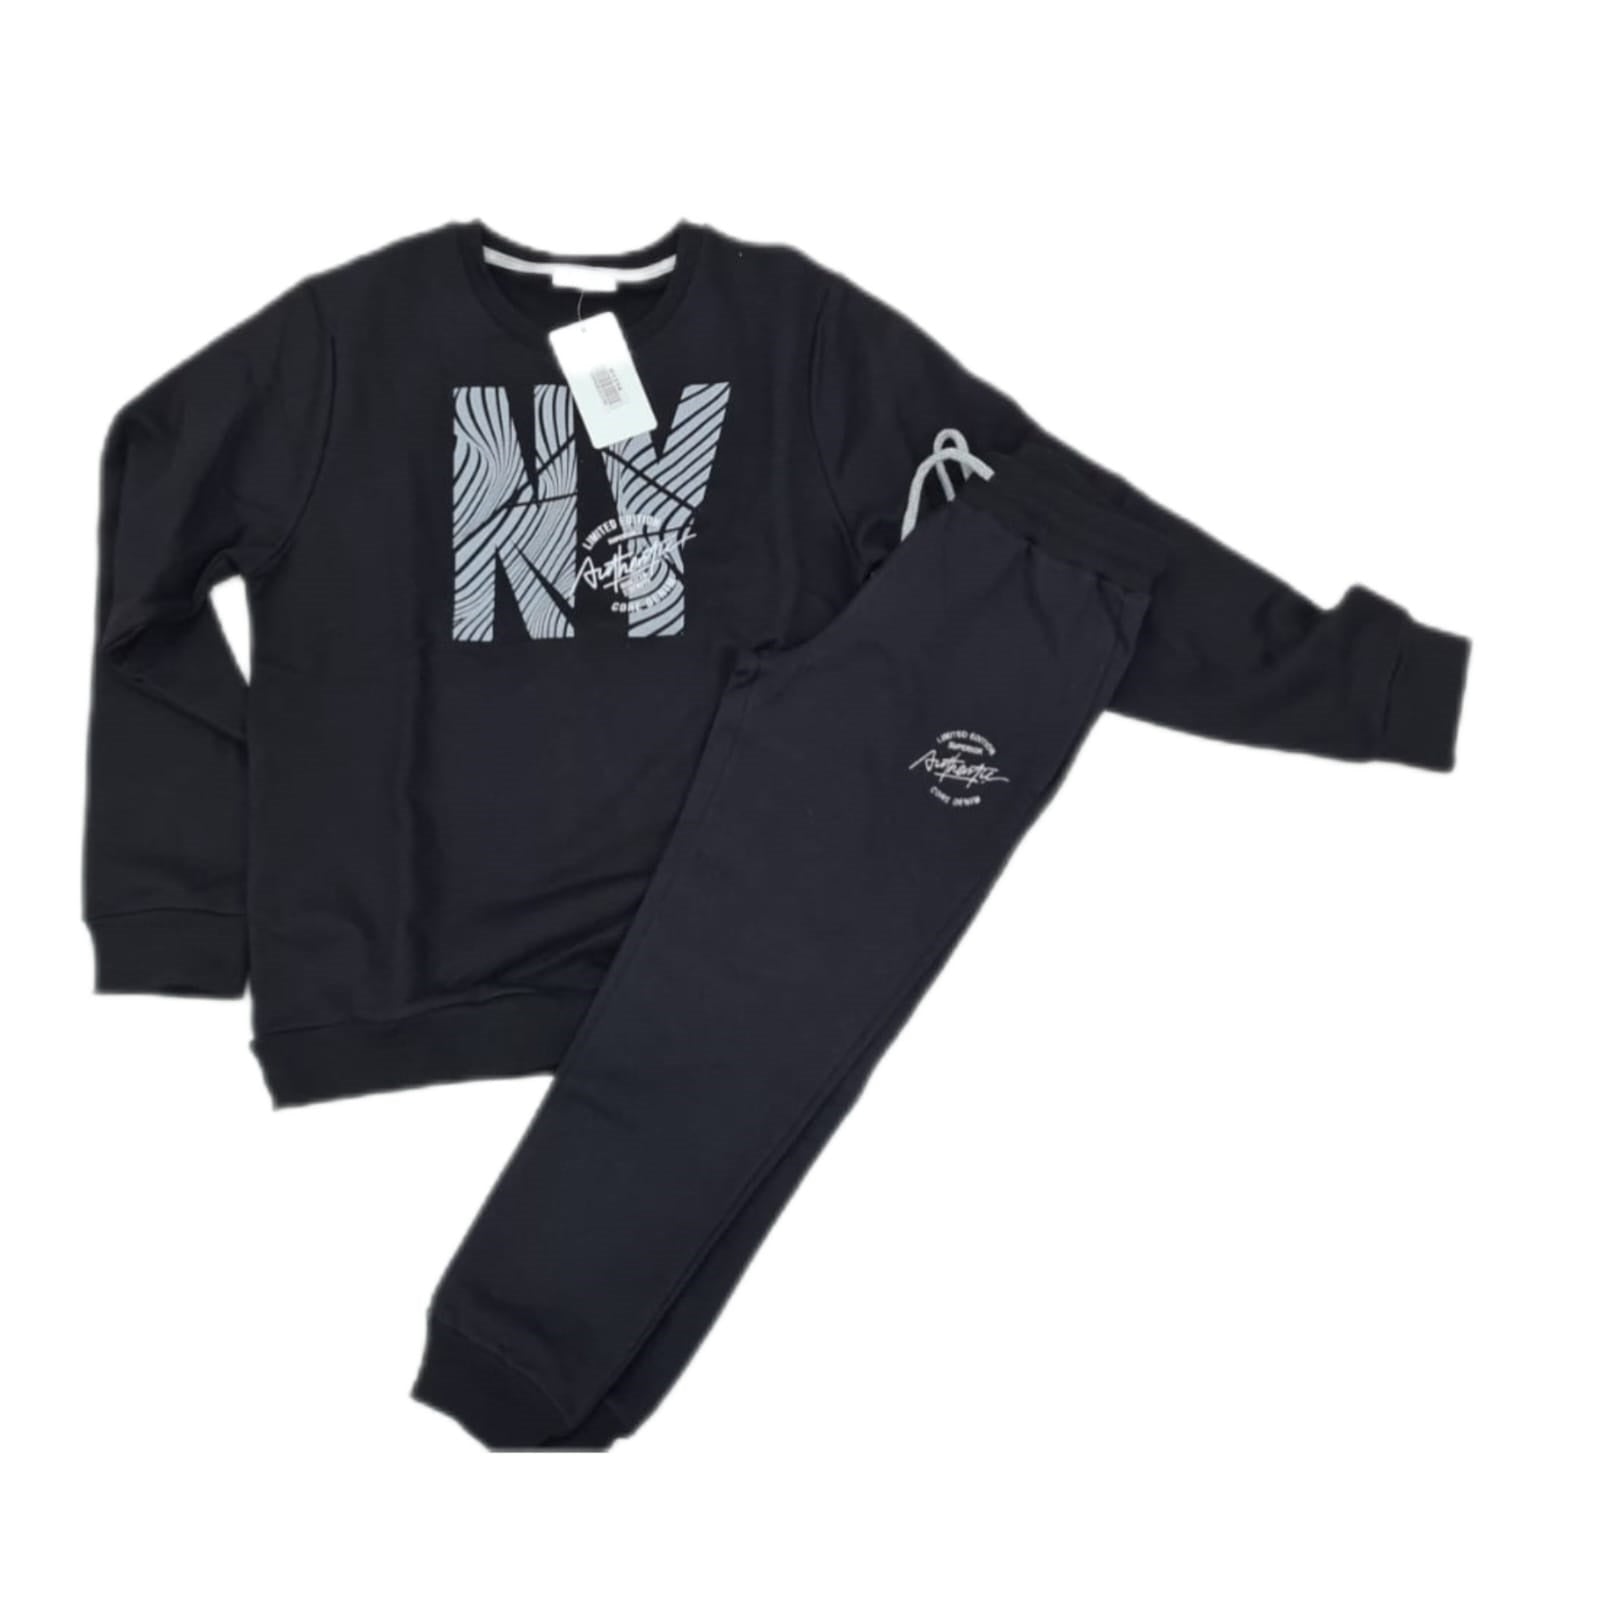 6-15 Years Authentic Boys Tracksuit (Black/Blue/Gray) - 6-15 Years Authentic Boys Tracksuit (Black/Blue/Gray) - Black / 6-7 Years - Macawi - Melymod